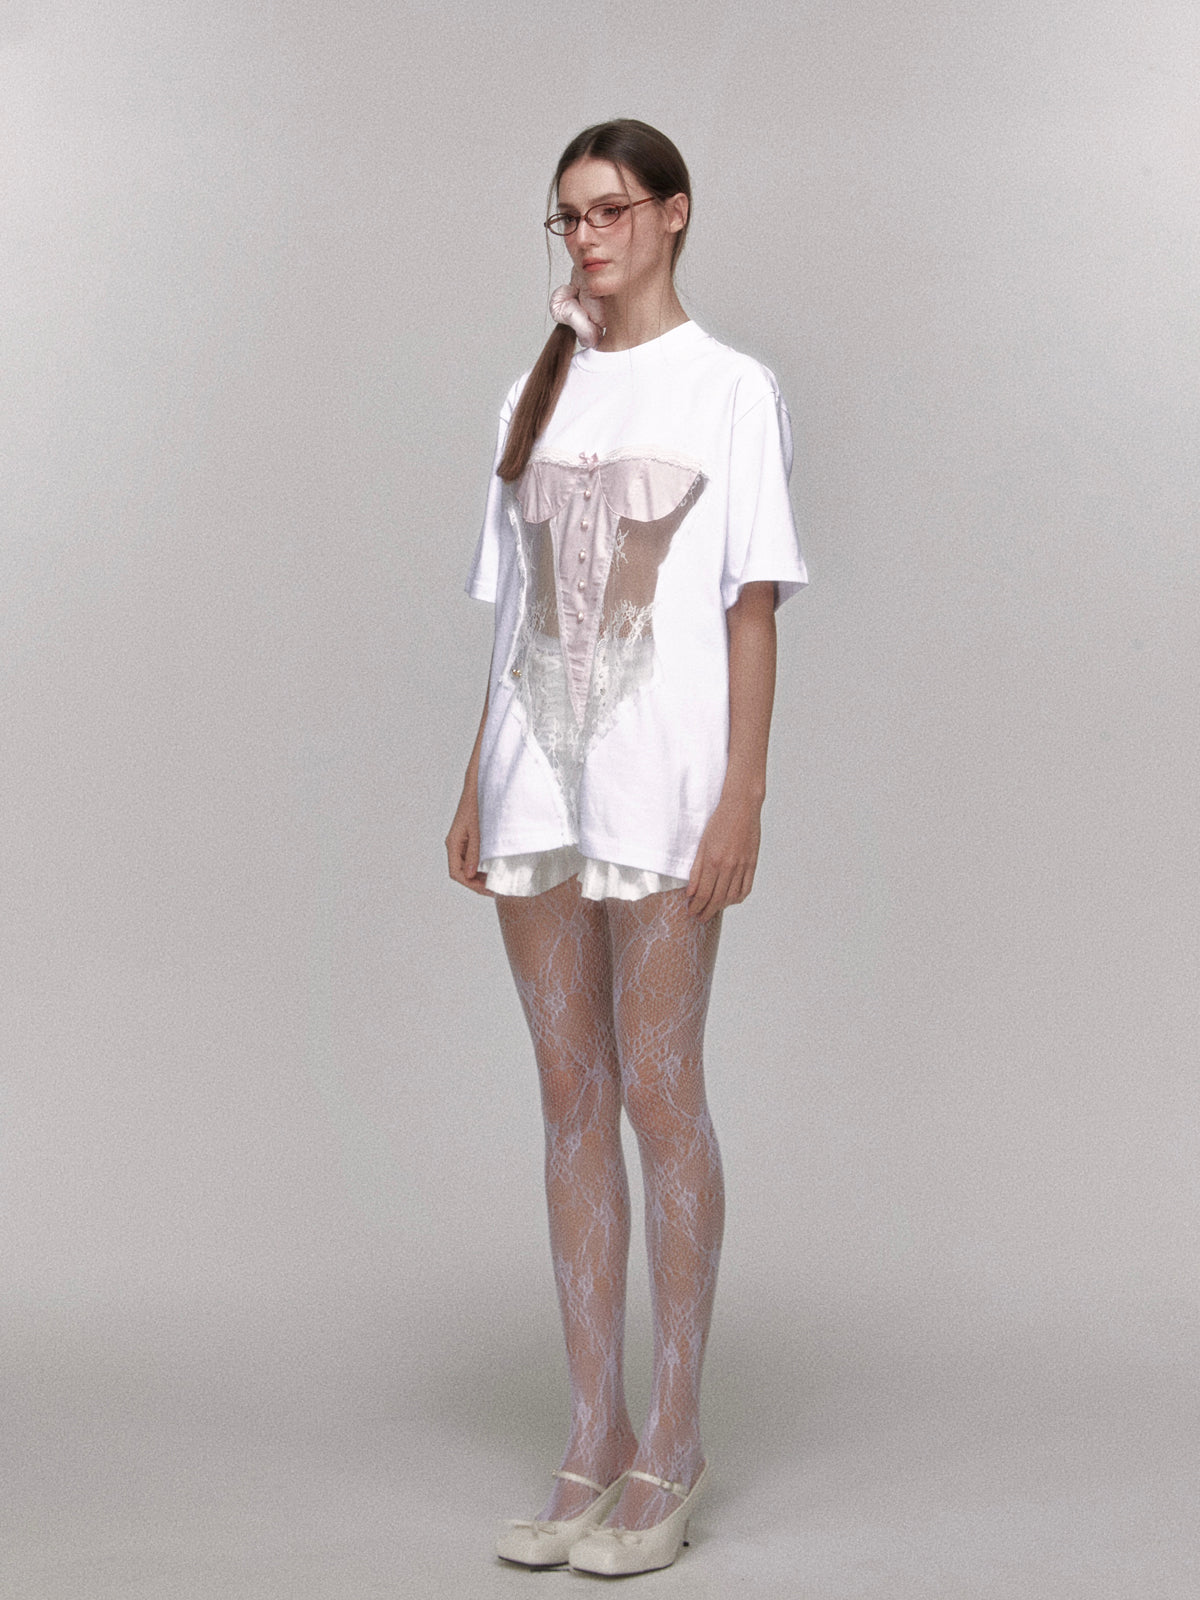 Hollow Stitching Short Sleeves See-through Design T-shirt 34O0005